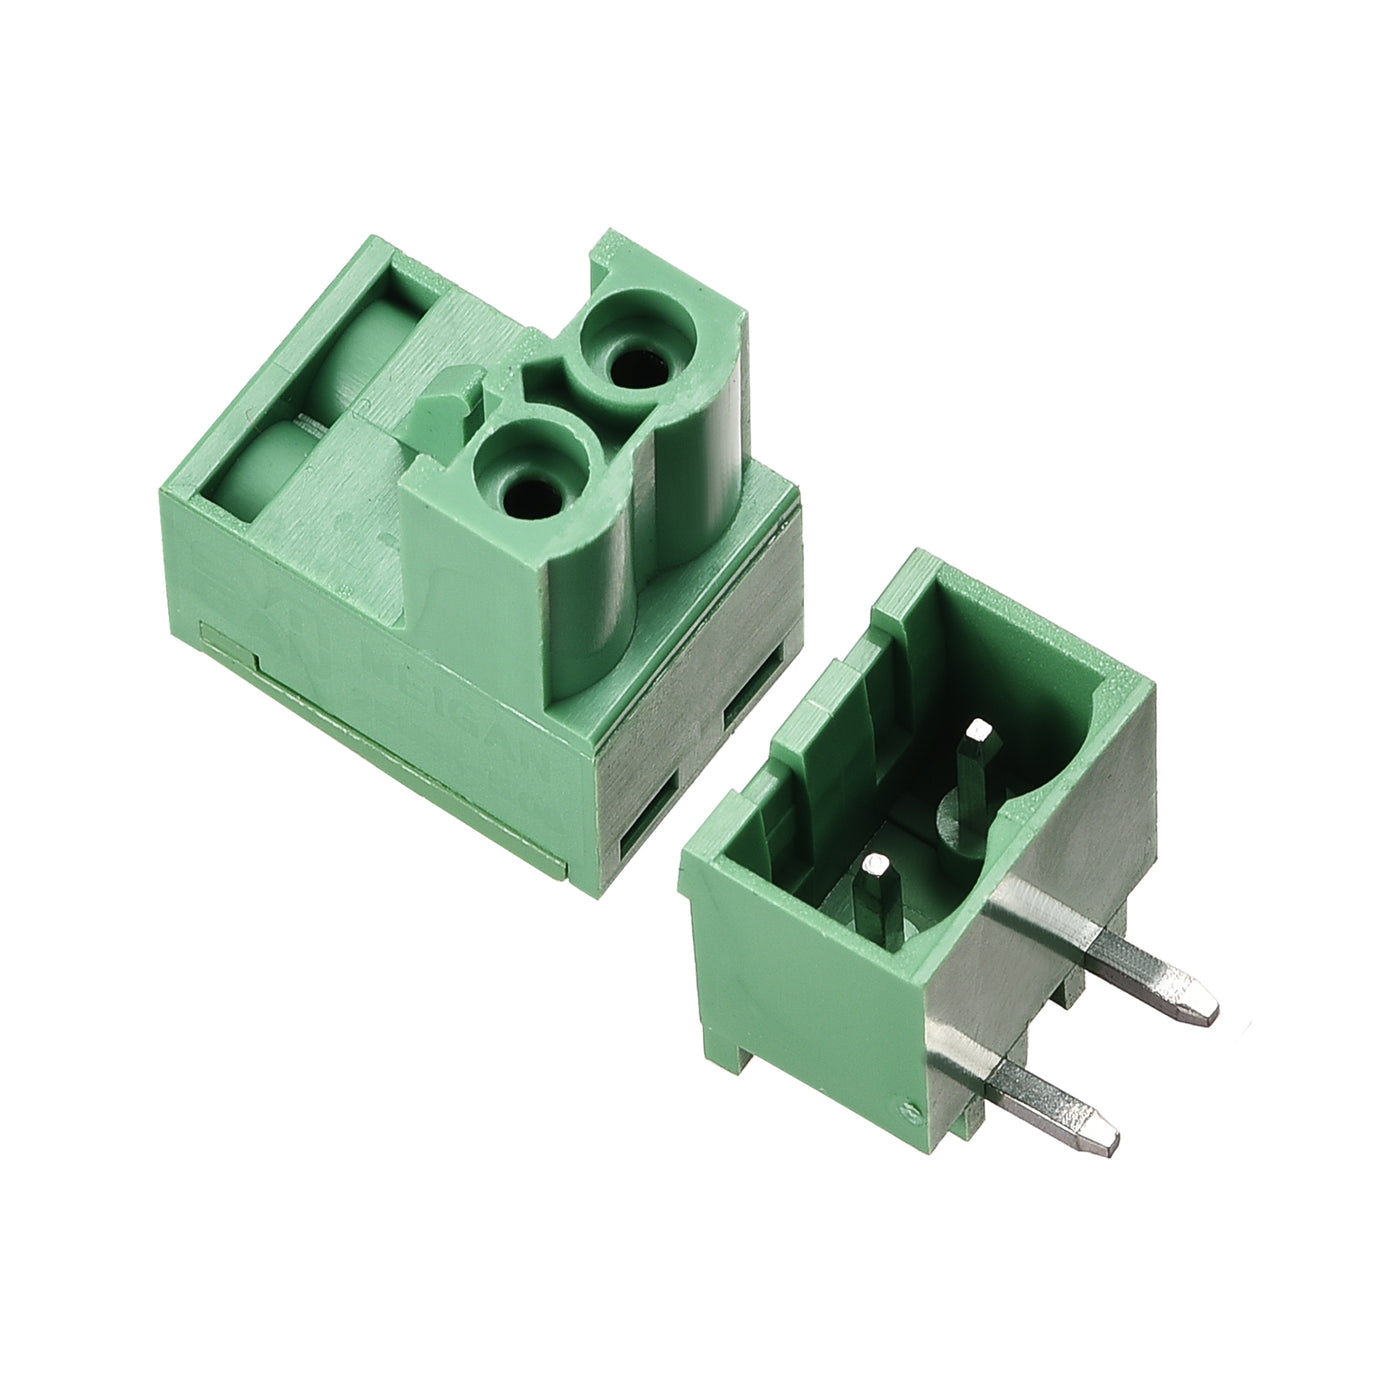 uxcell Uxcell 2-Pin 5.08mm Pitch Right Angle PCB Screw Terminal Block Connector 5 Sets